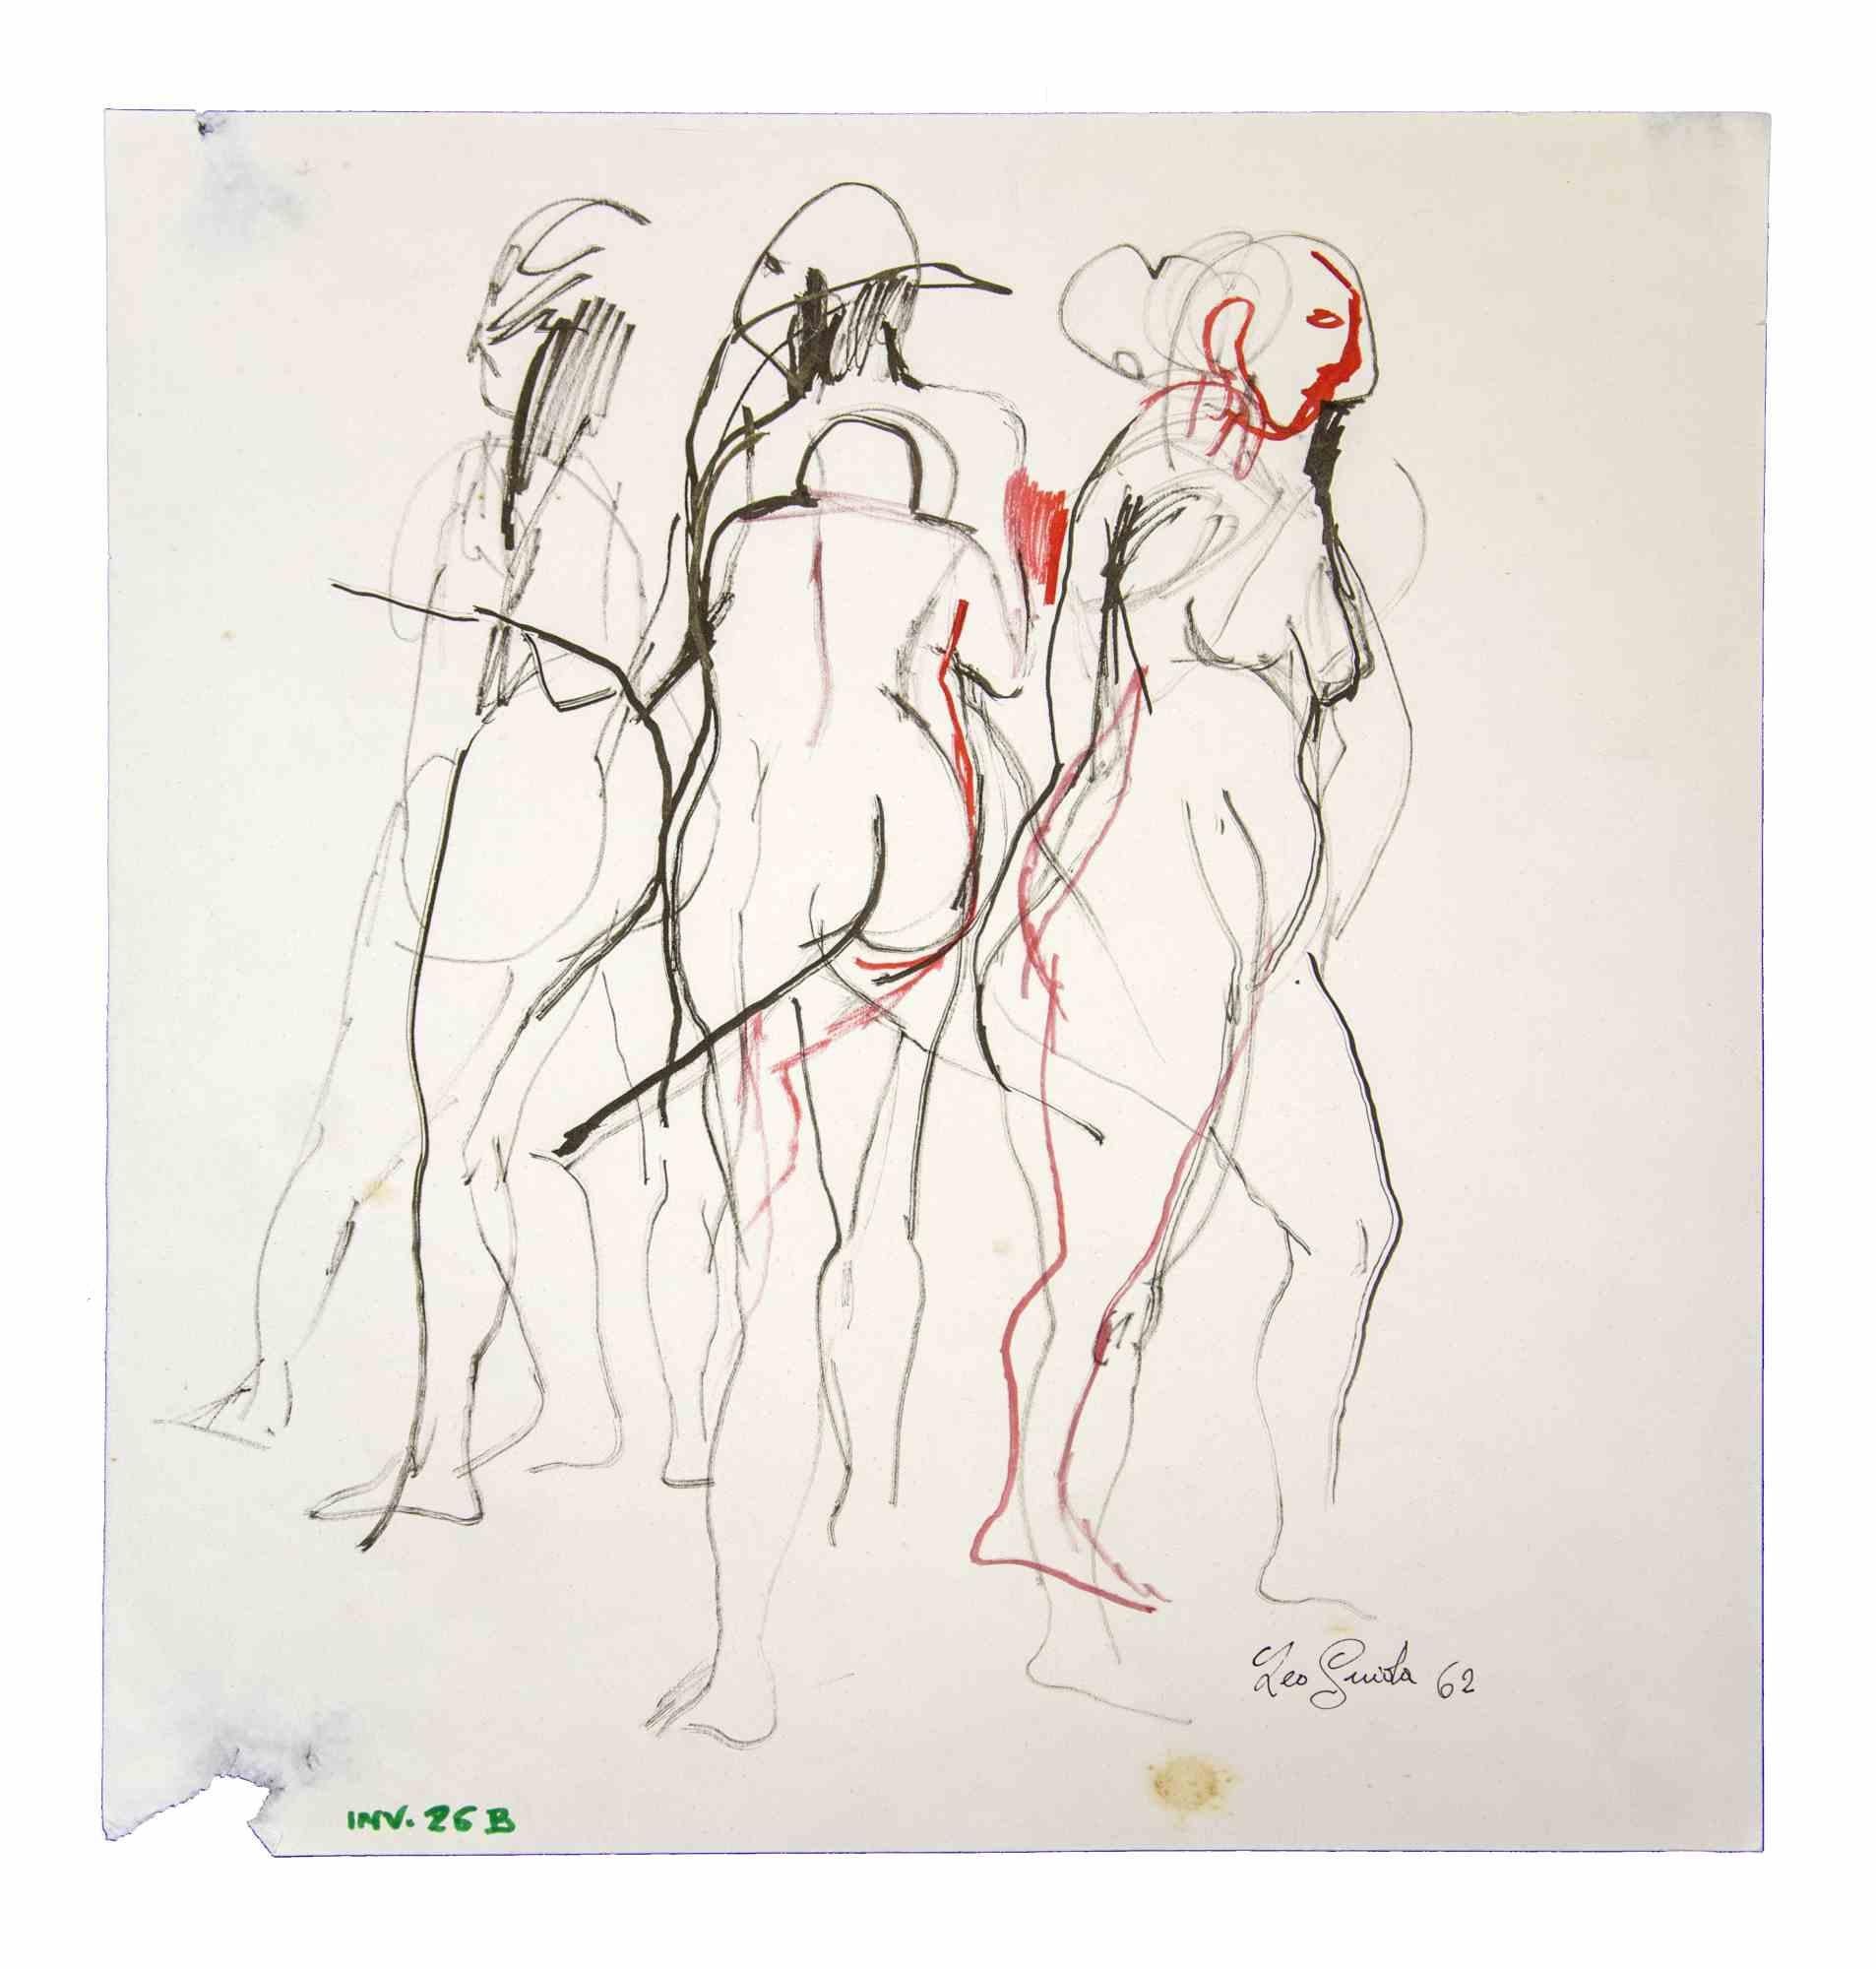 Nudes - Drawing by Leo Guida - 1962